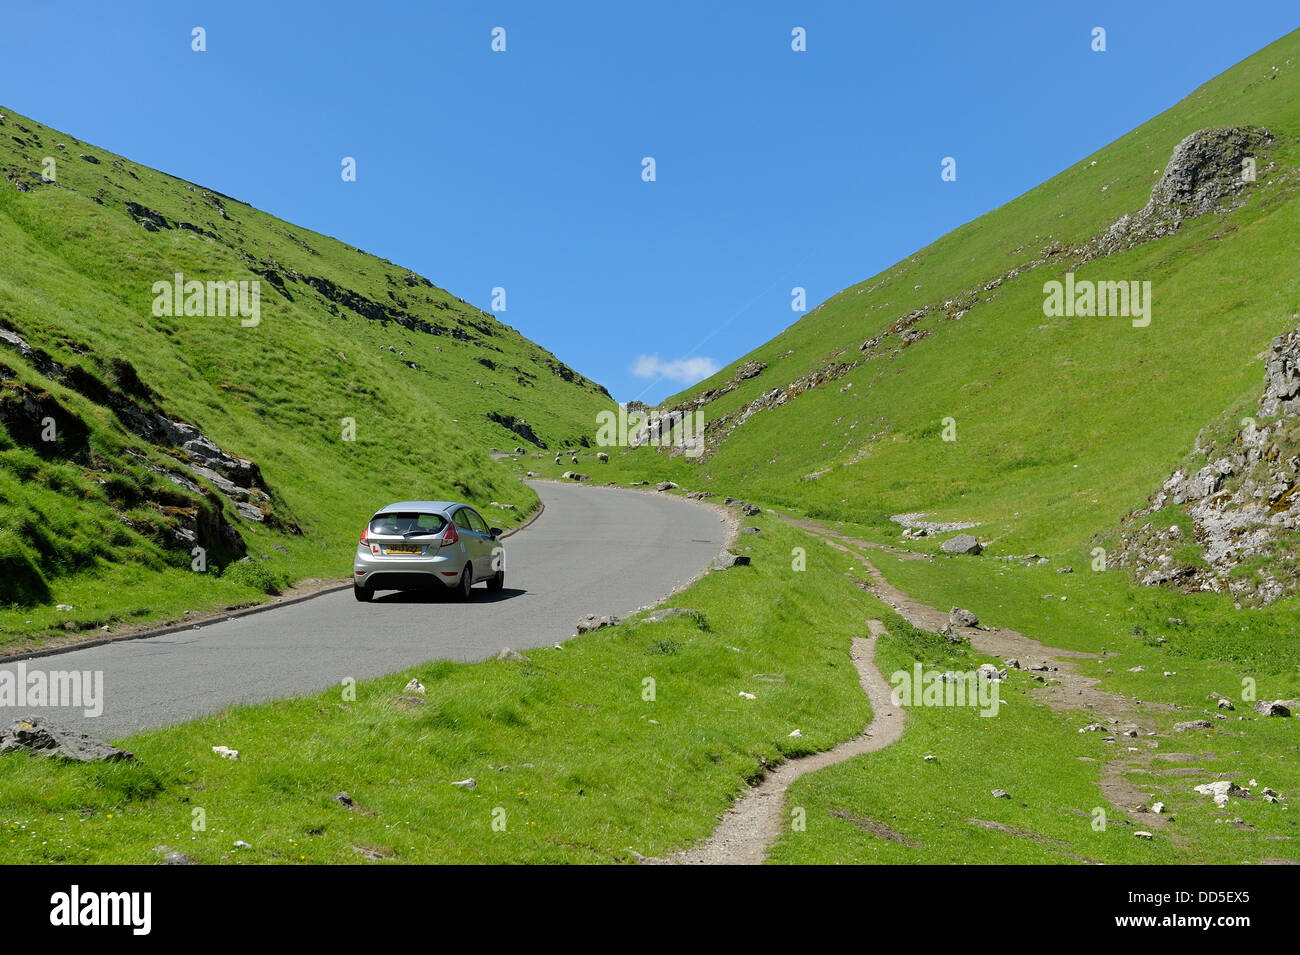 A learner driver on the country road through Winnats pass Derbyshire England uk Stock Photo